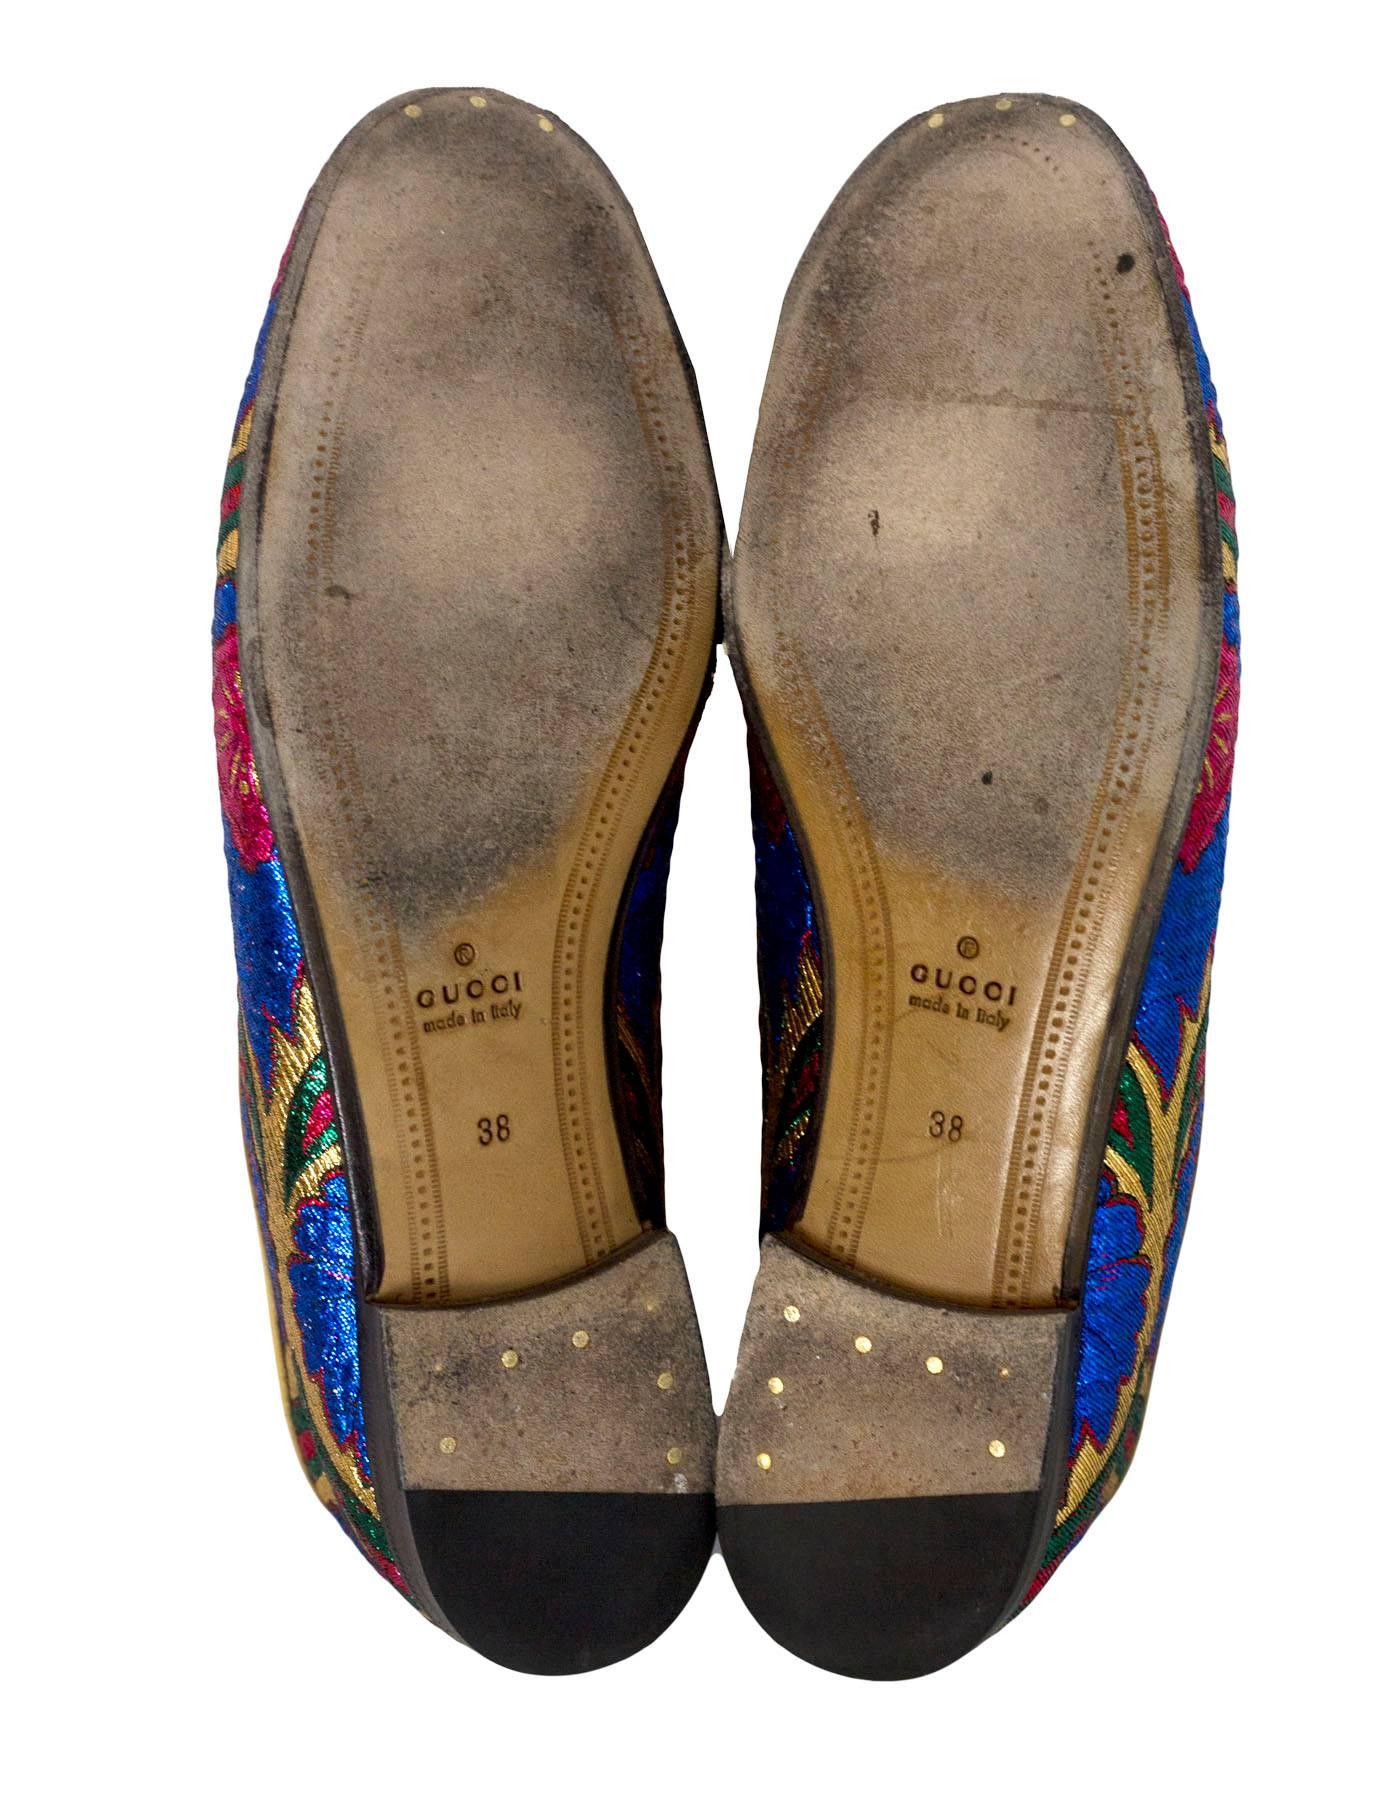 Gucci Brocade Multi-Colored Loafers Sz 38 with Box and DB 1